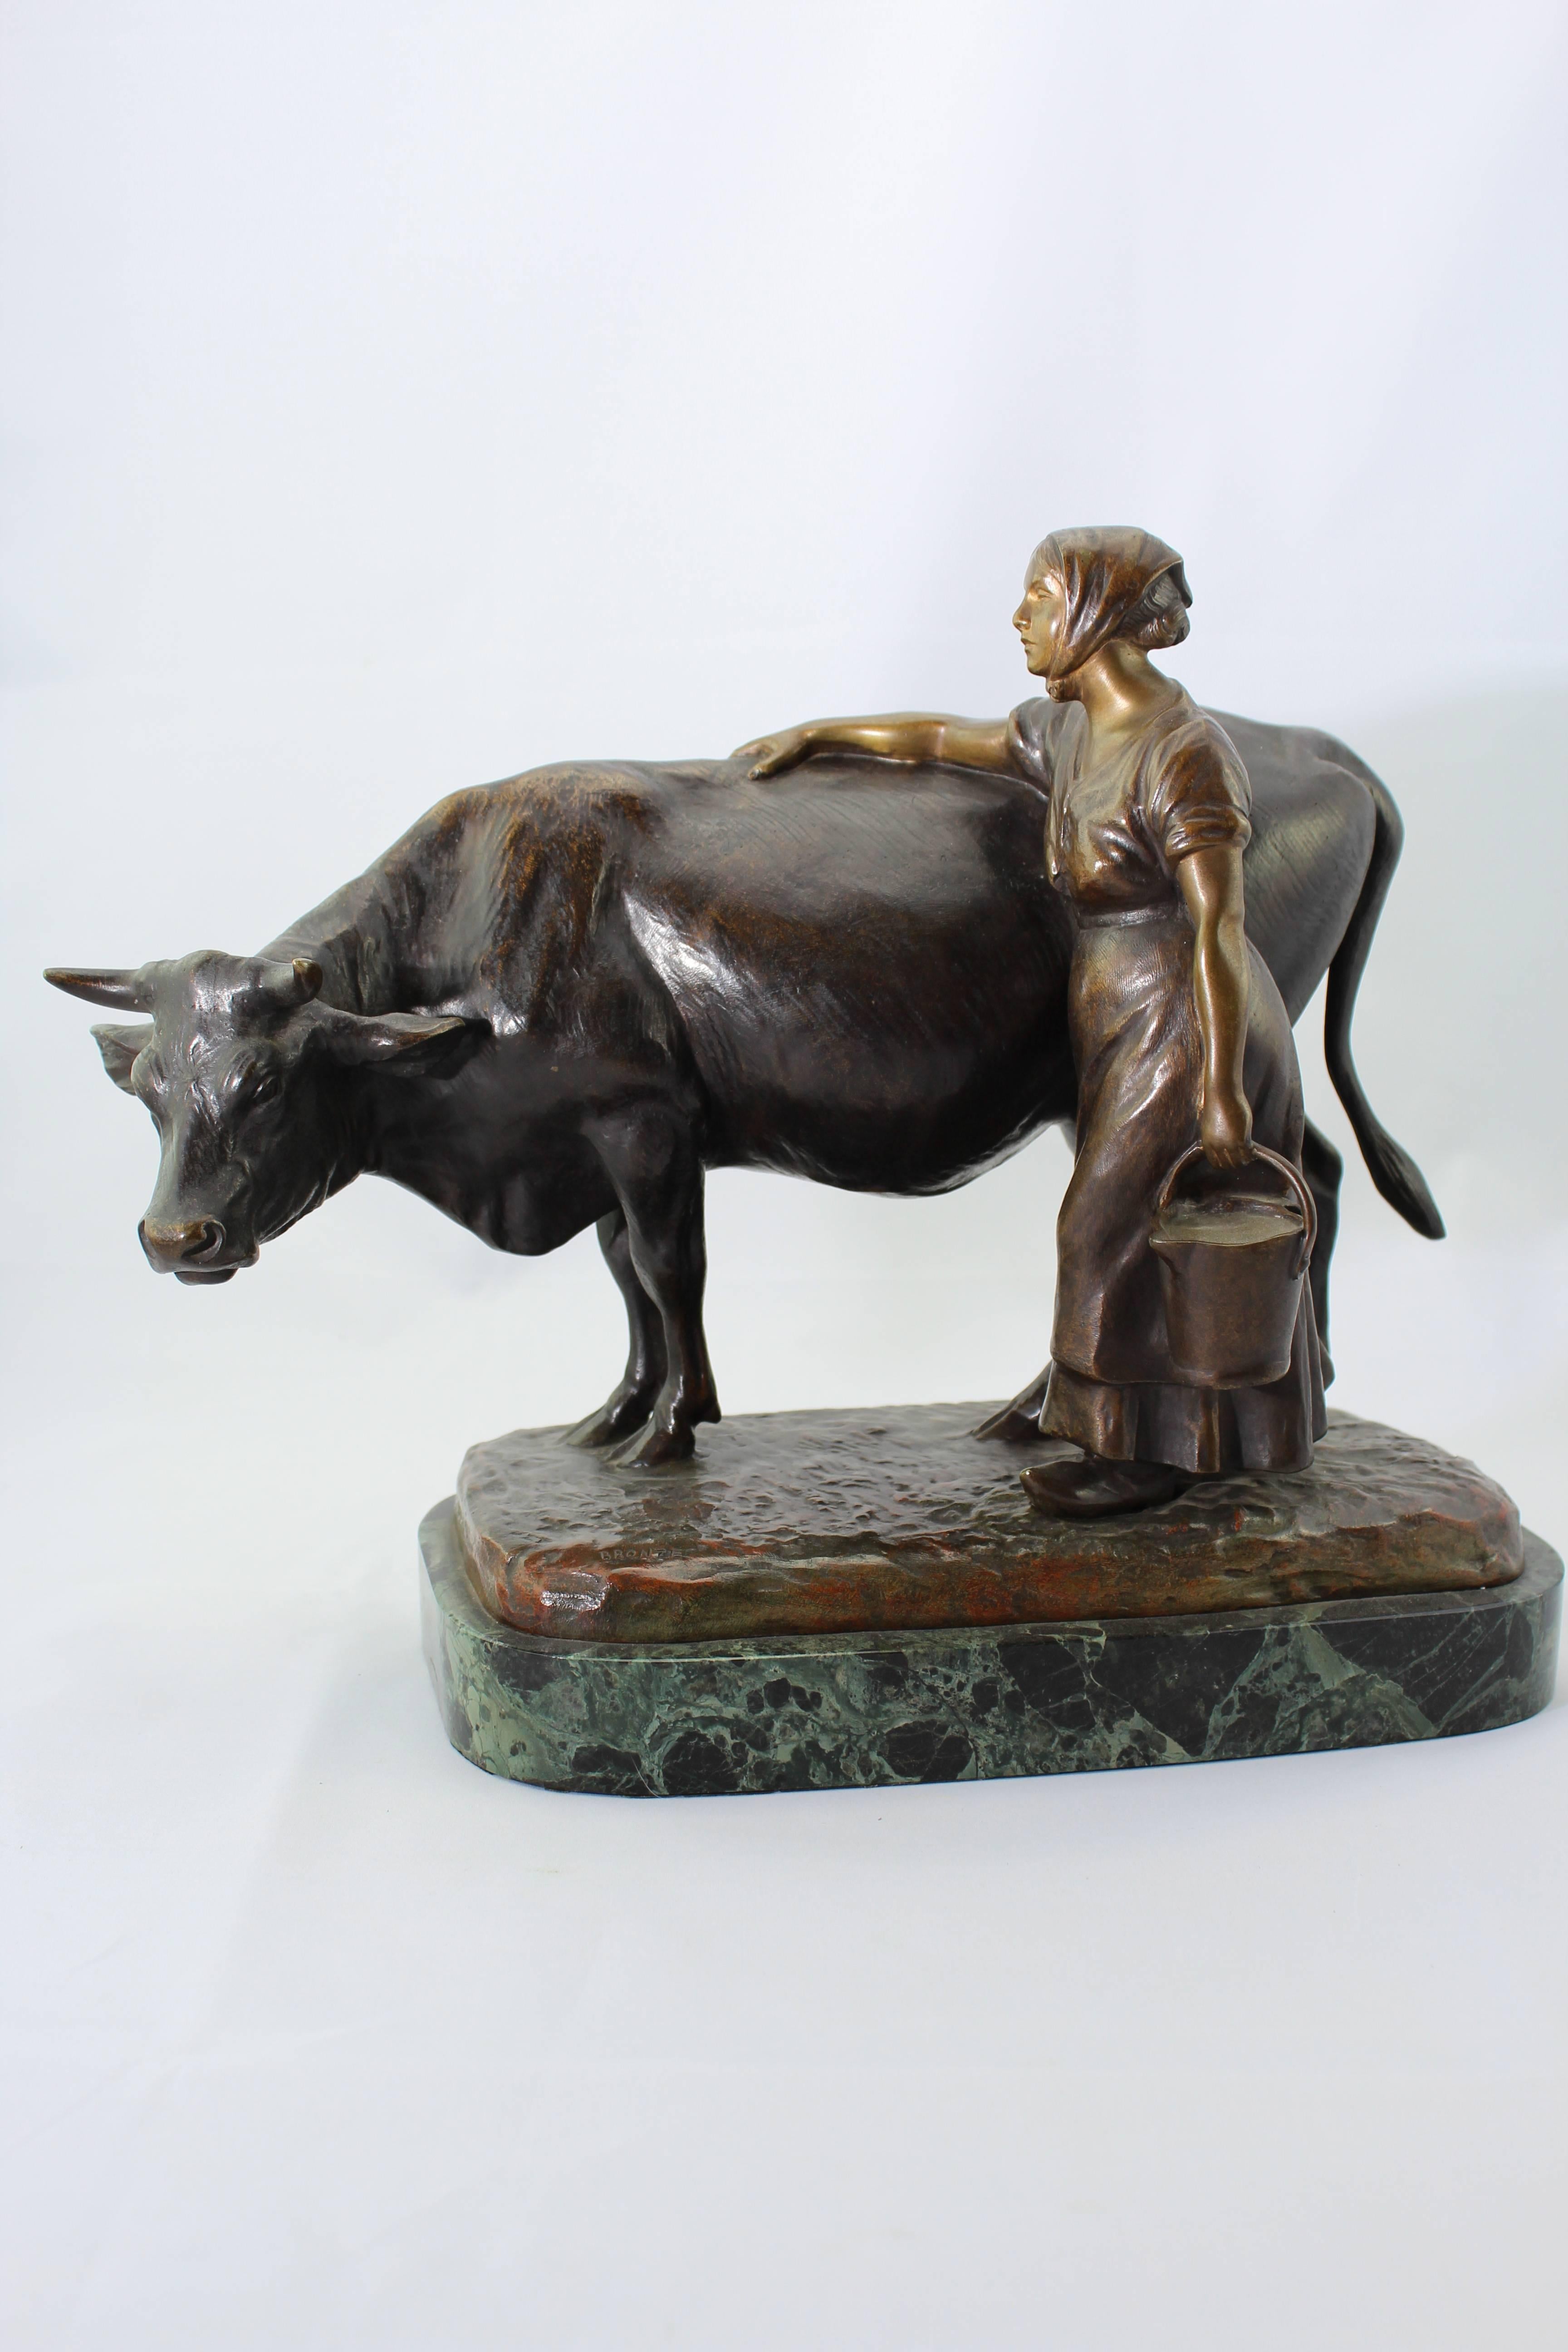 Louis Riche (French, 1877-1949) Paris.

An early Art Nouveau 20th century, French, bronze animalier of a large standing cow and a pensive milk maiden who just finished doing one of her chores carrying a full bucket of milk resting her tired figure